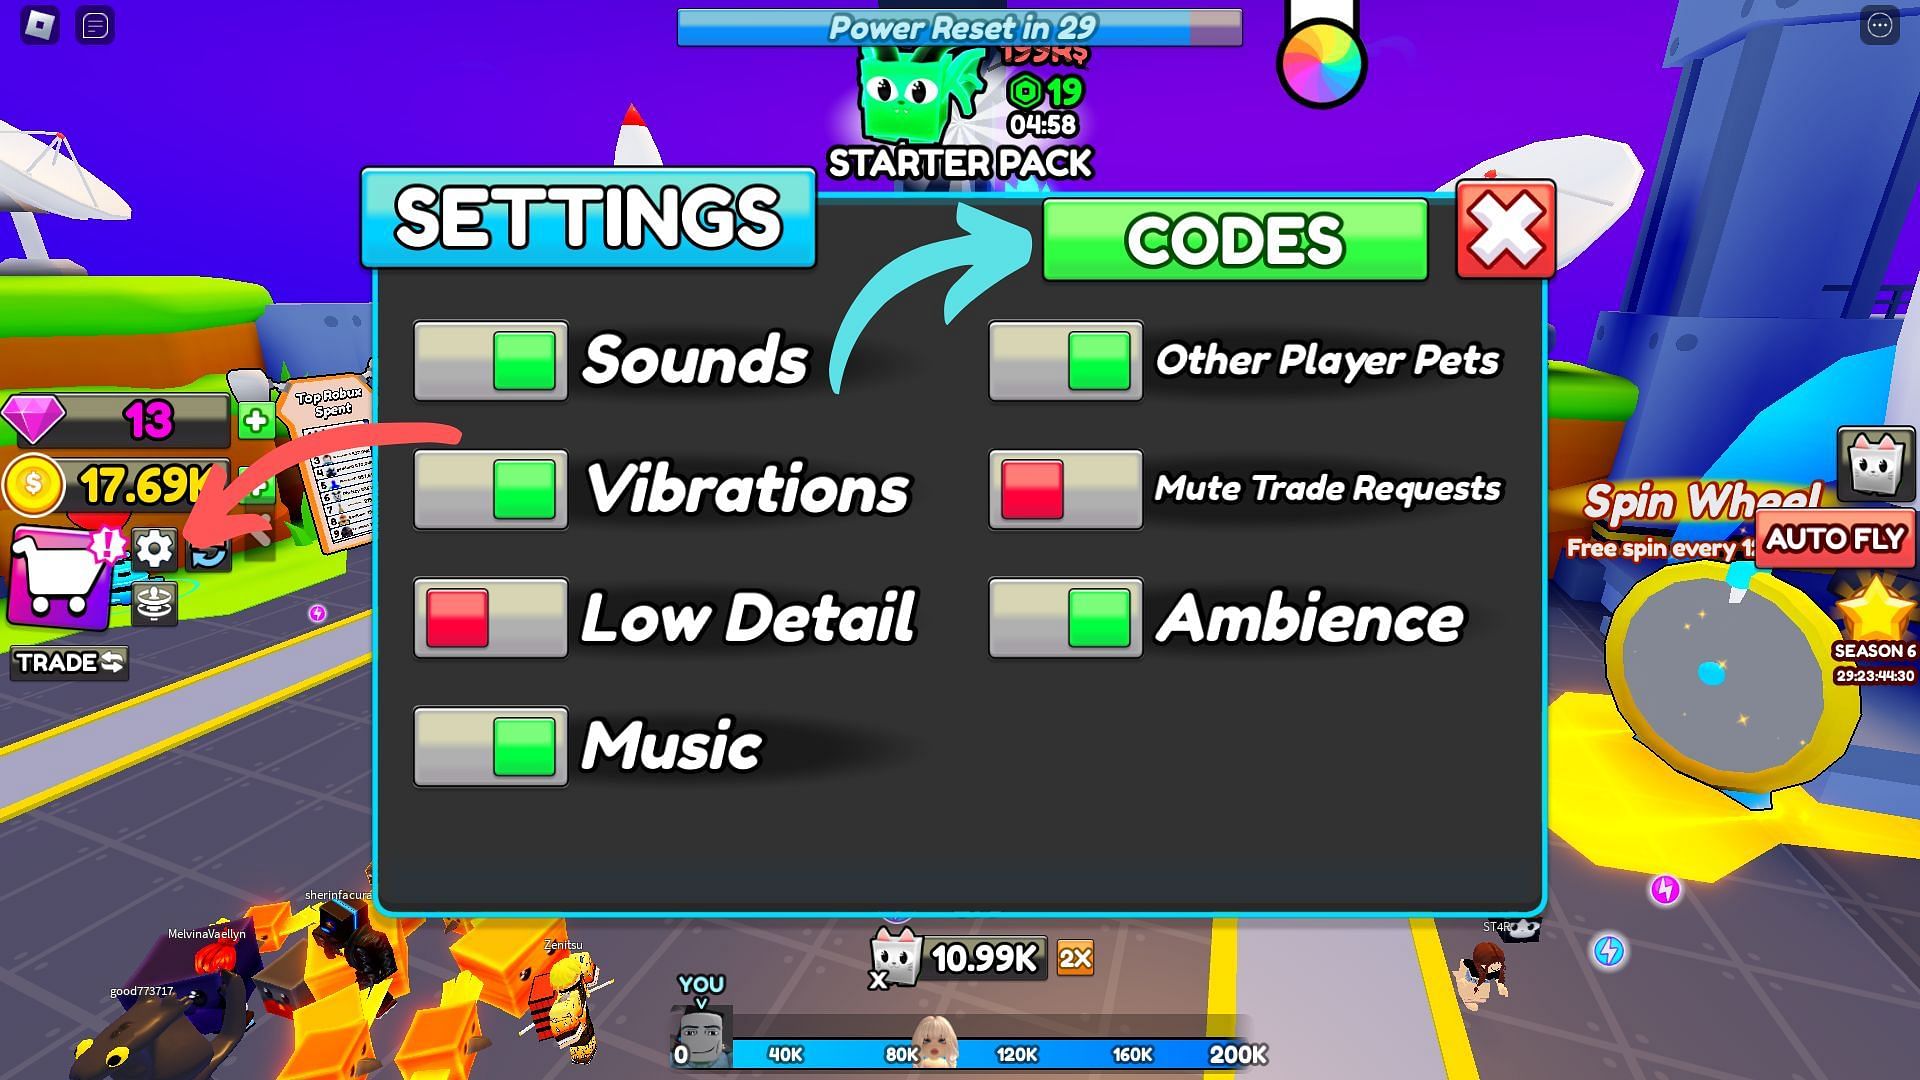 How to redeem codes for Ride a Cart Simulator (Image via Roblox and Sportskeeda)